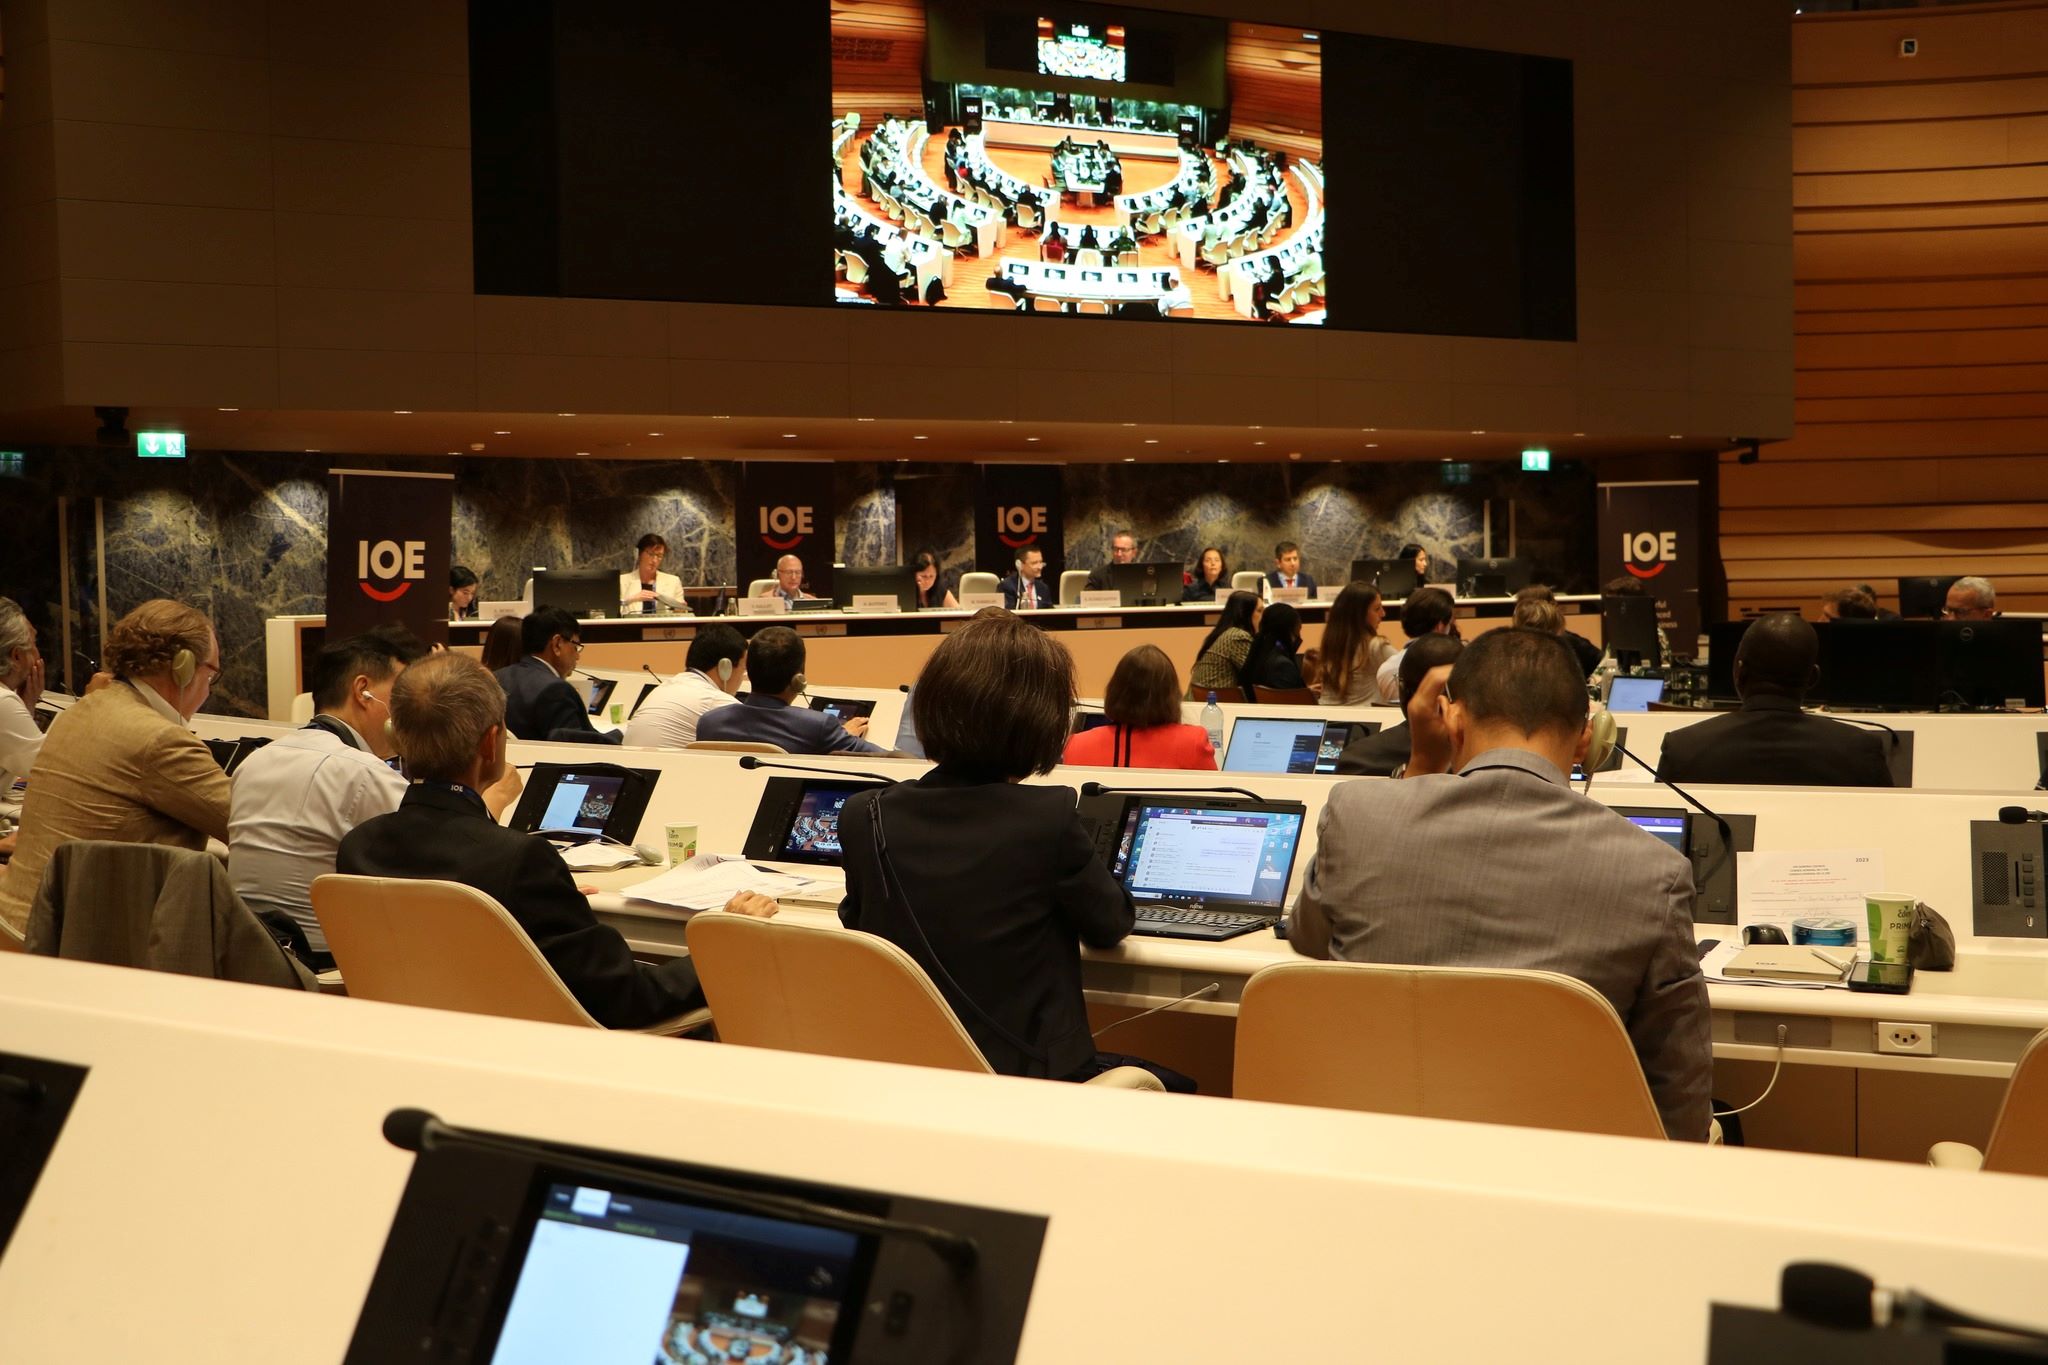 The General Assembly of the IOE was held